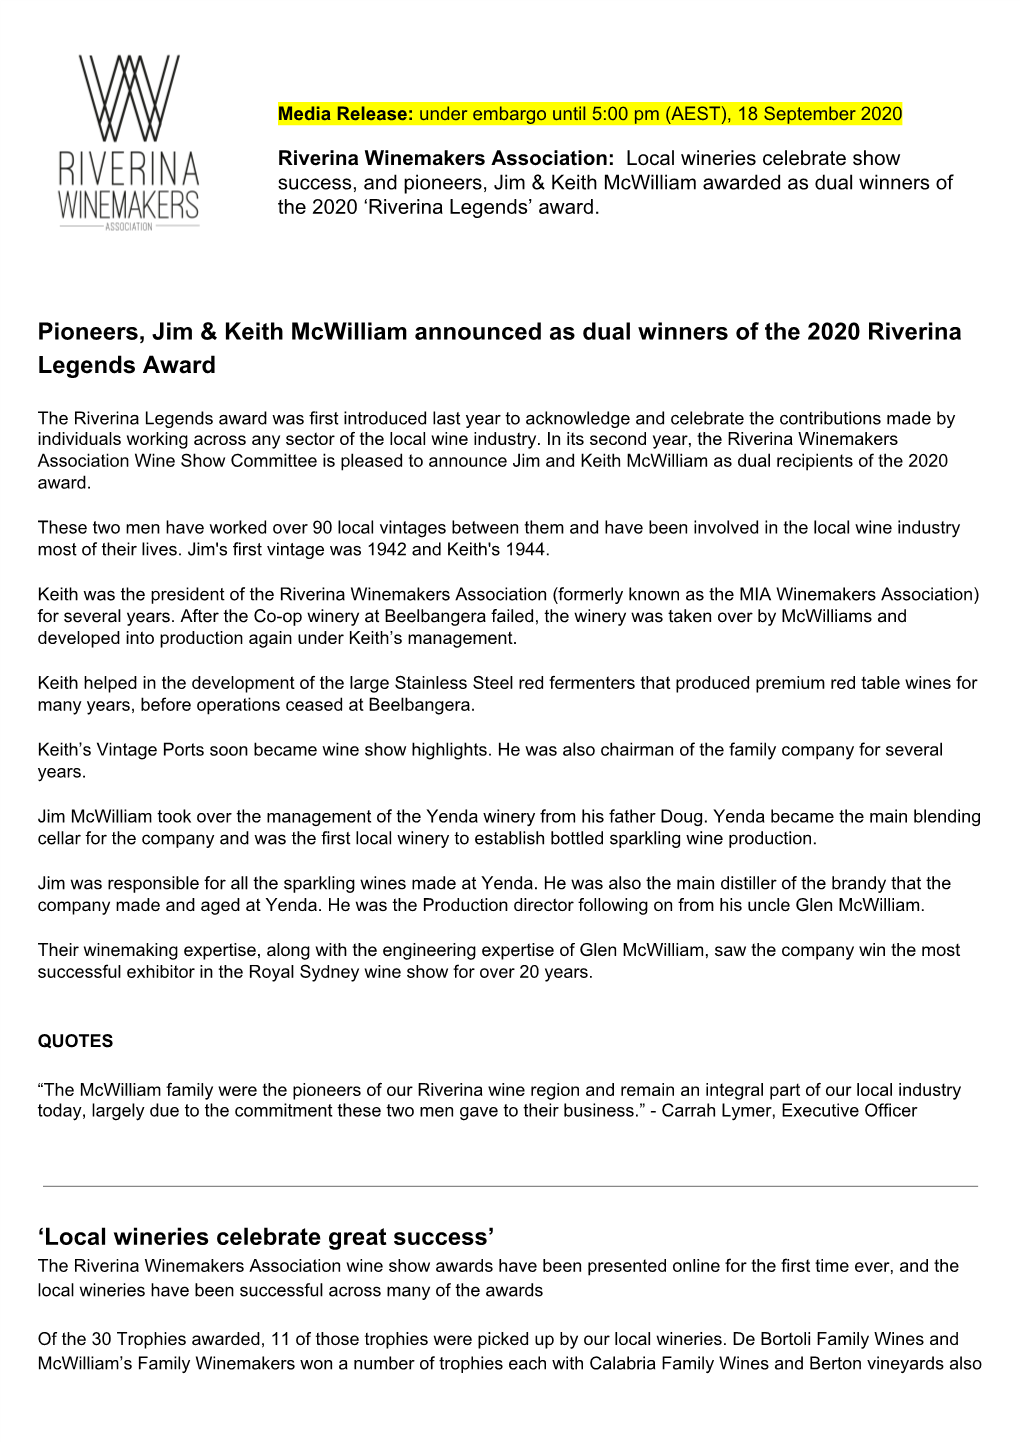 Pioneers, Jim & Keith Mcwilliam Announced As Dual Winners of the 2020 Riverina Legends Award 'Local Wineries Celebrate